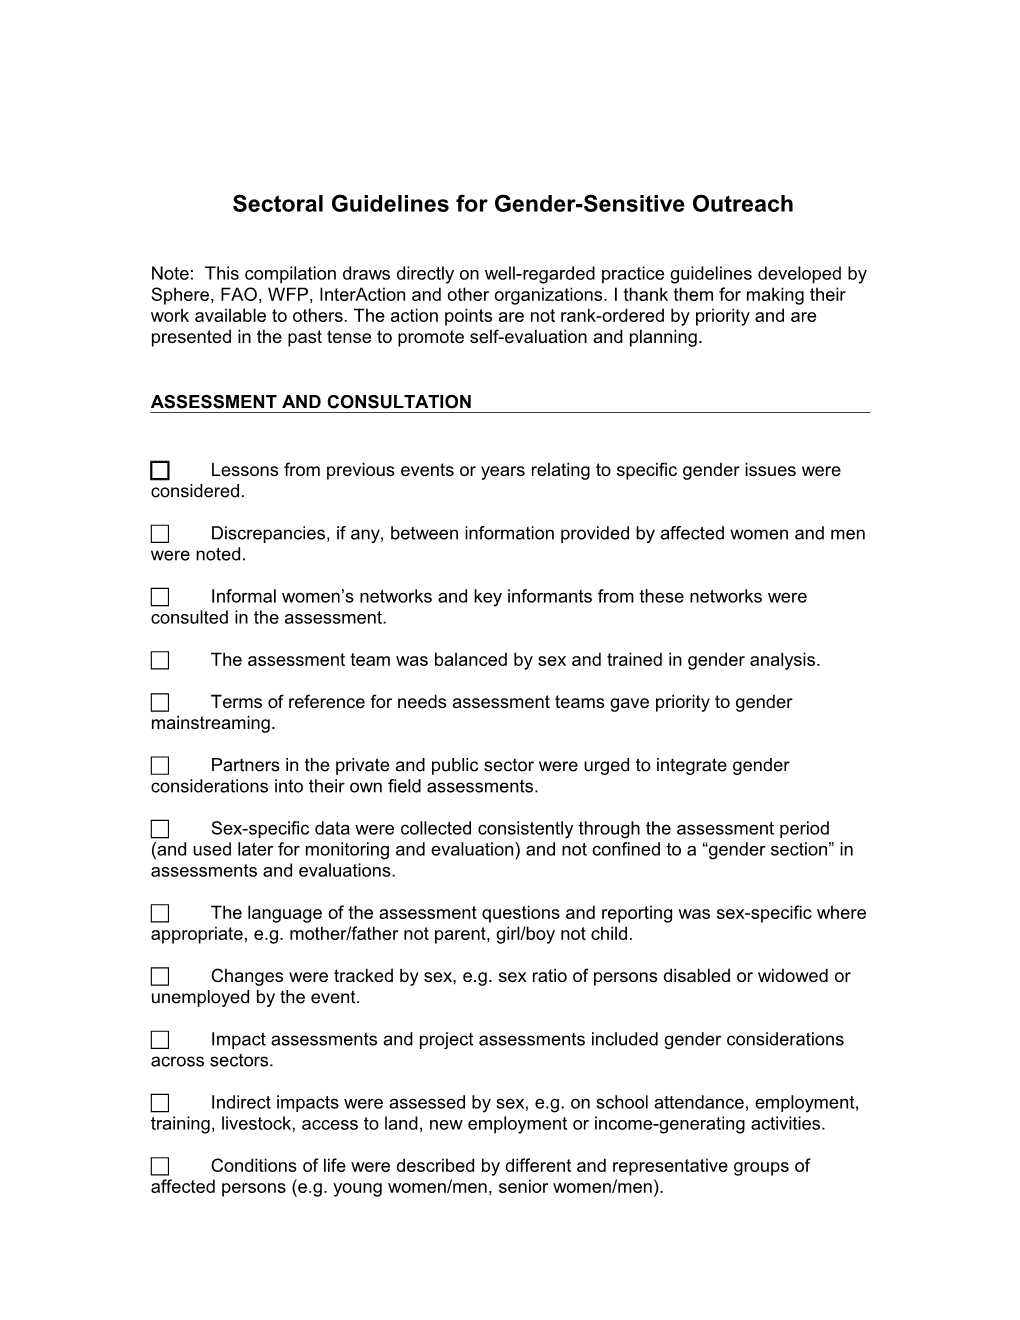 Sectoral Guidelines for Gender-Sensitive Outreach